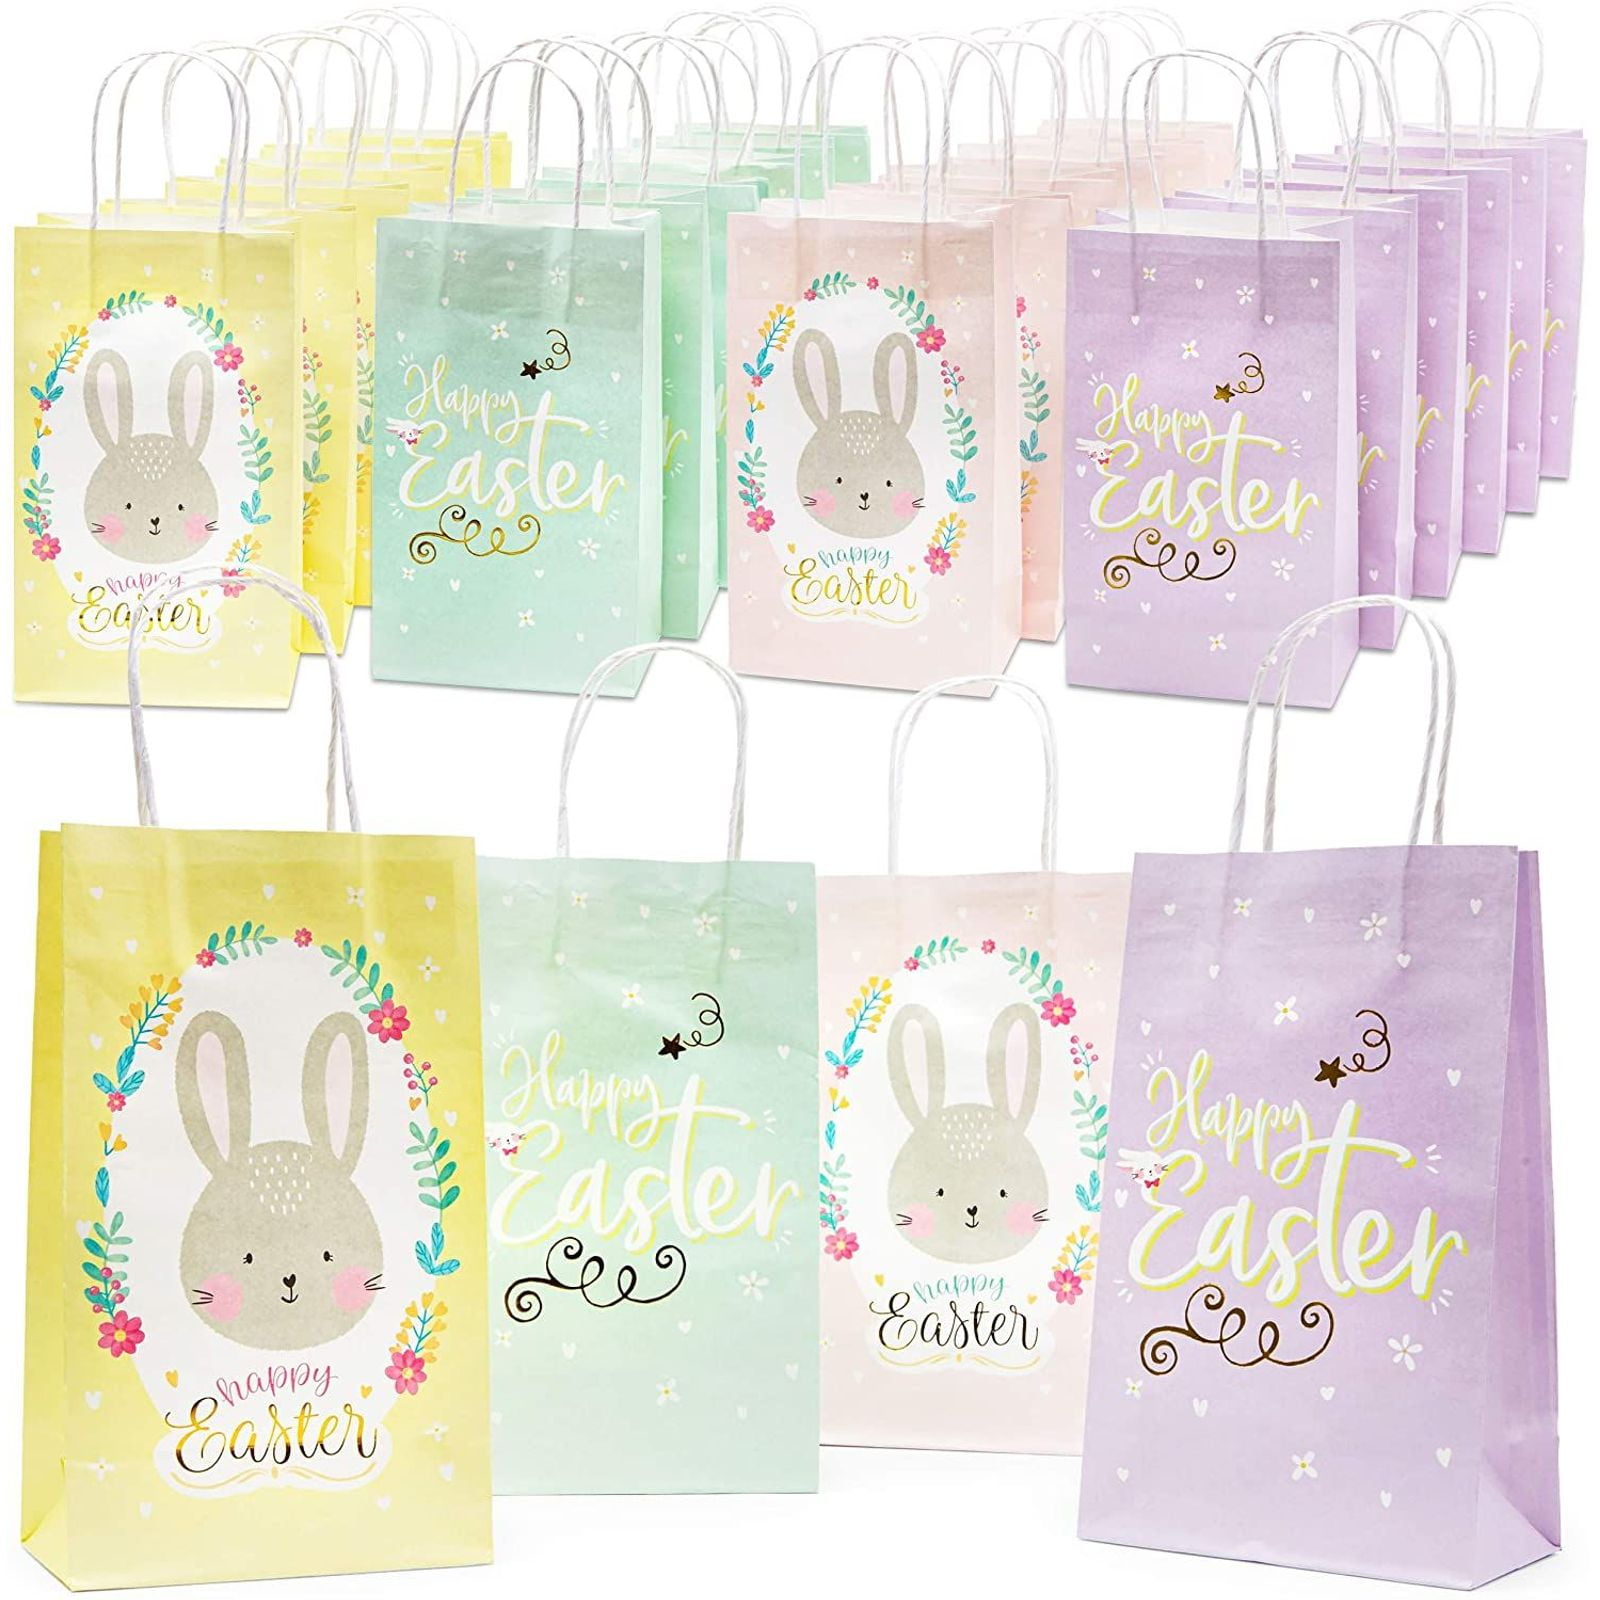 24-Pack 9-Inch Easter Gift Bags with Creative DIY Easter Stickers Blue Easter Treat Bags Paper Wrapped Goodie Bags for Easter Basket Stuffers 4-Sheets